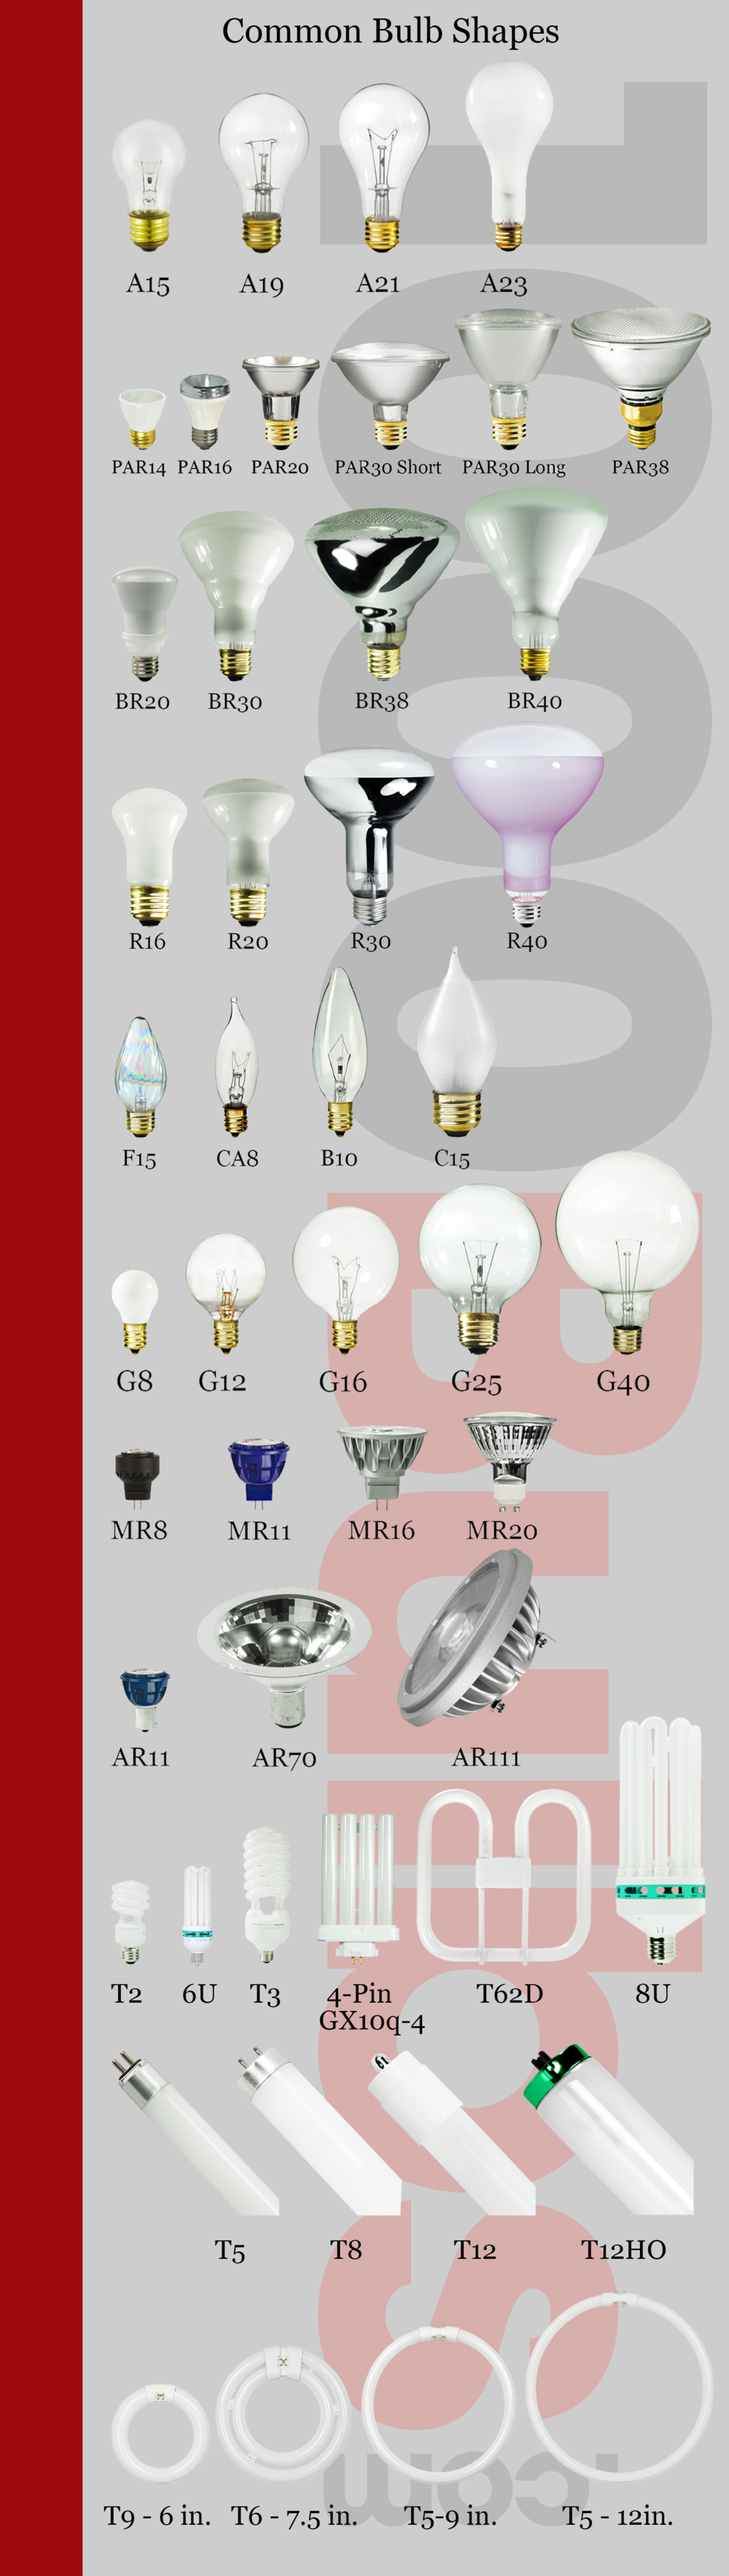 What of Light Bulb Is This? — Blog